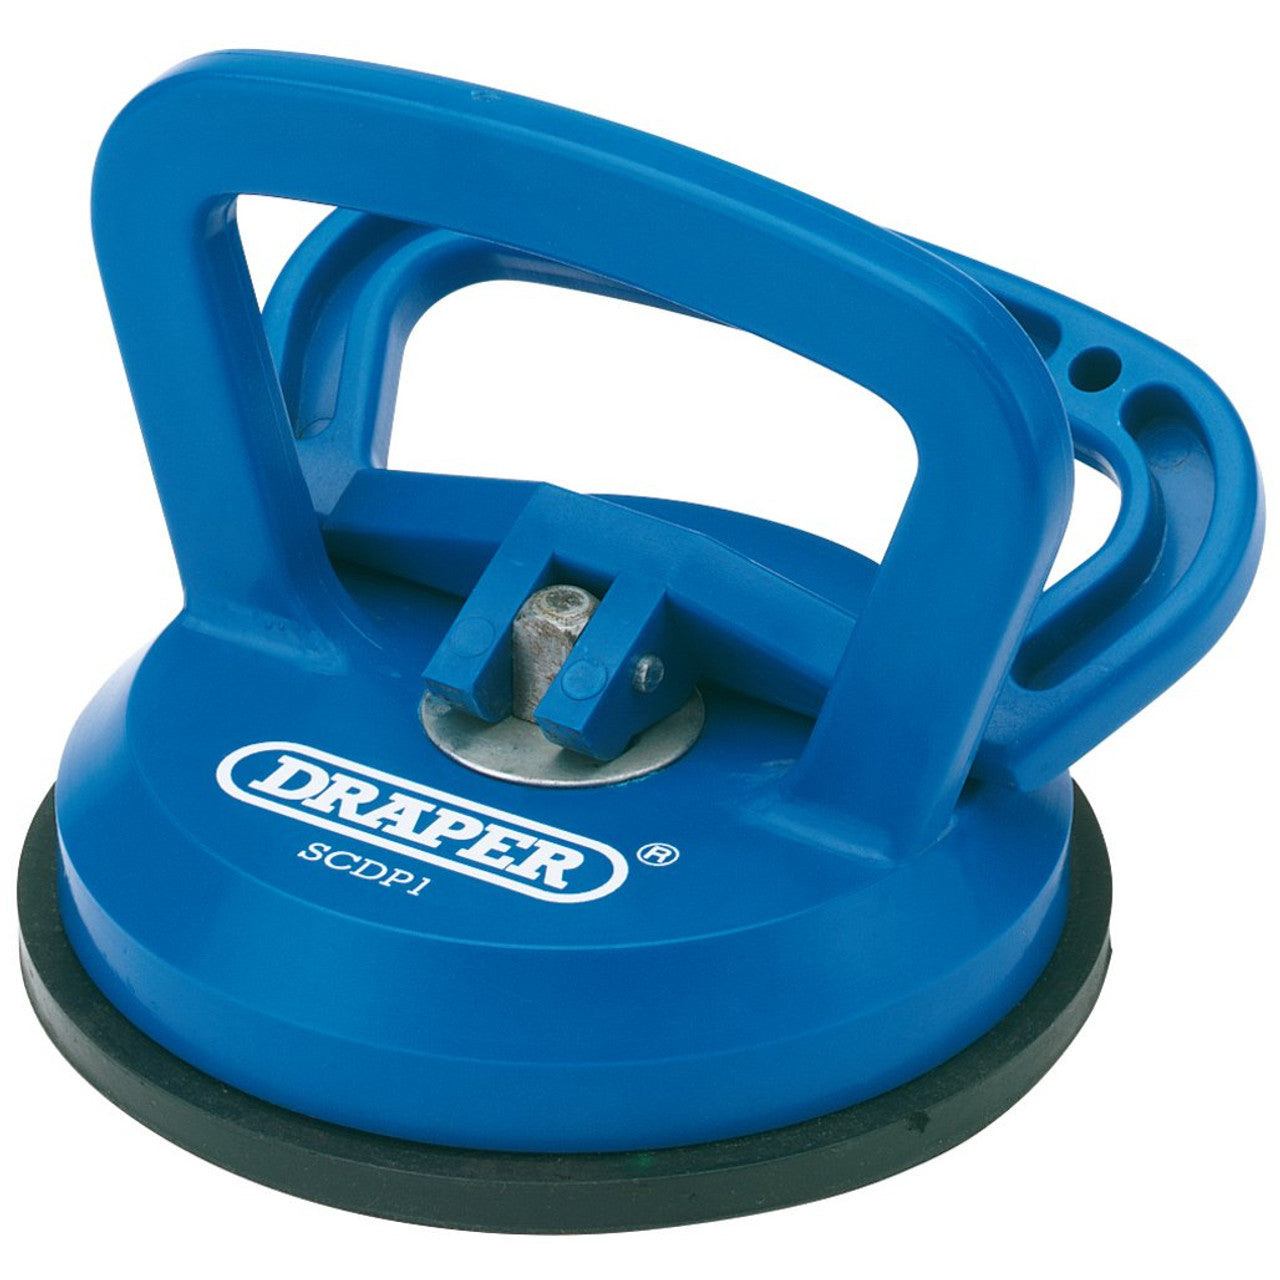 Draper 69187 Suction Cup/Dent Puller, 118mm